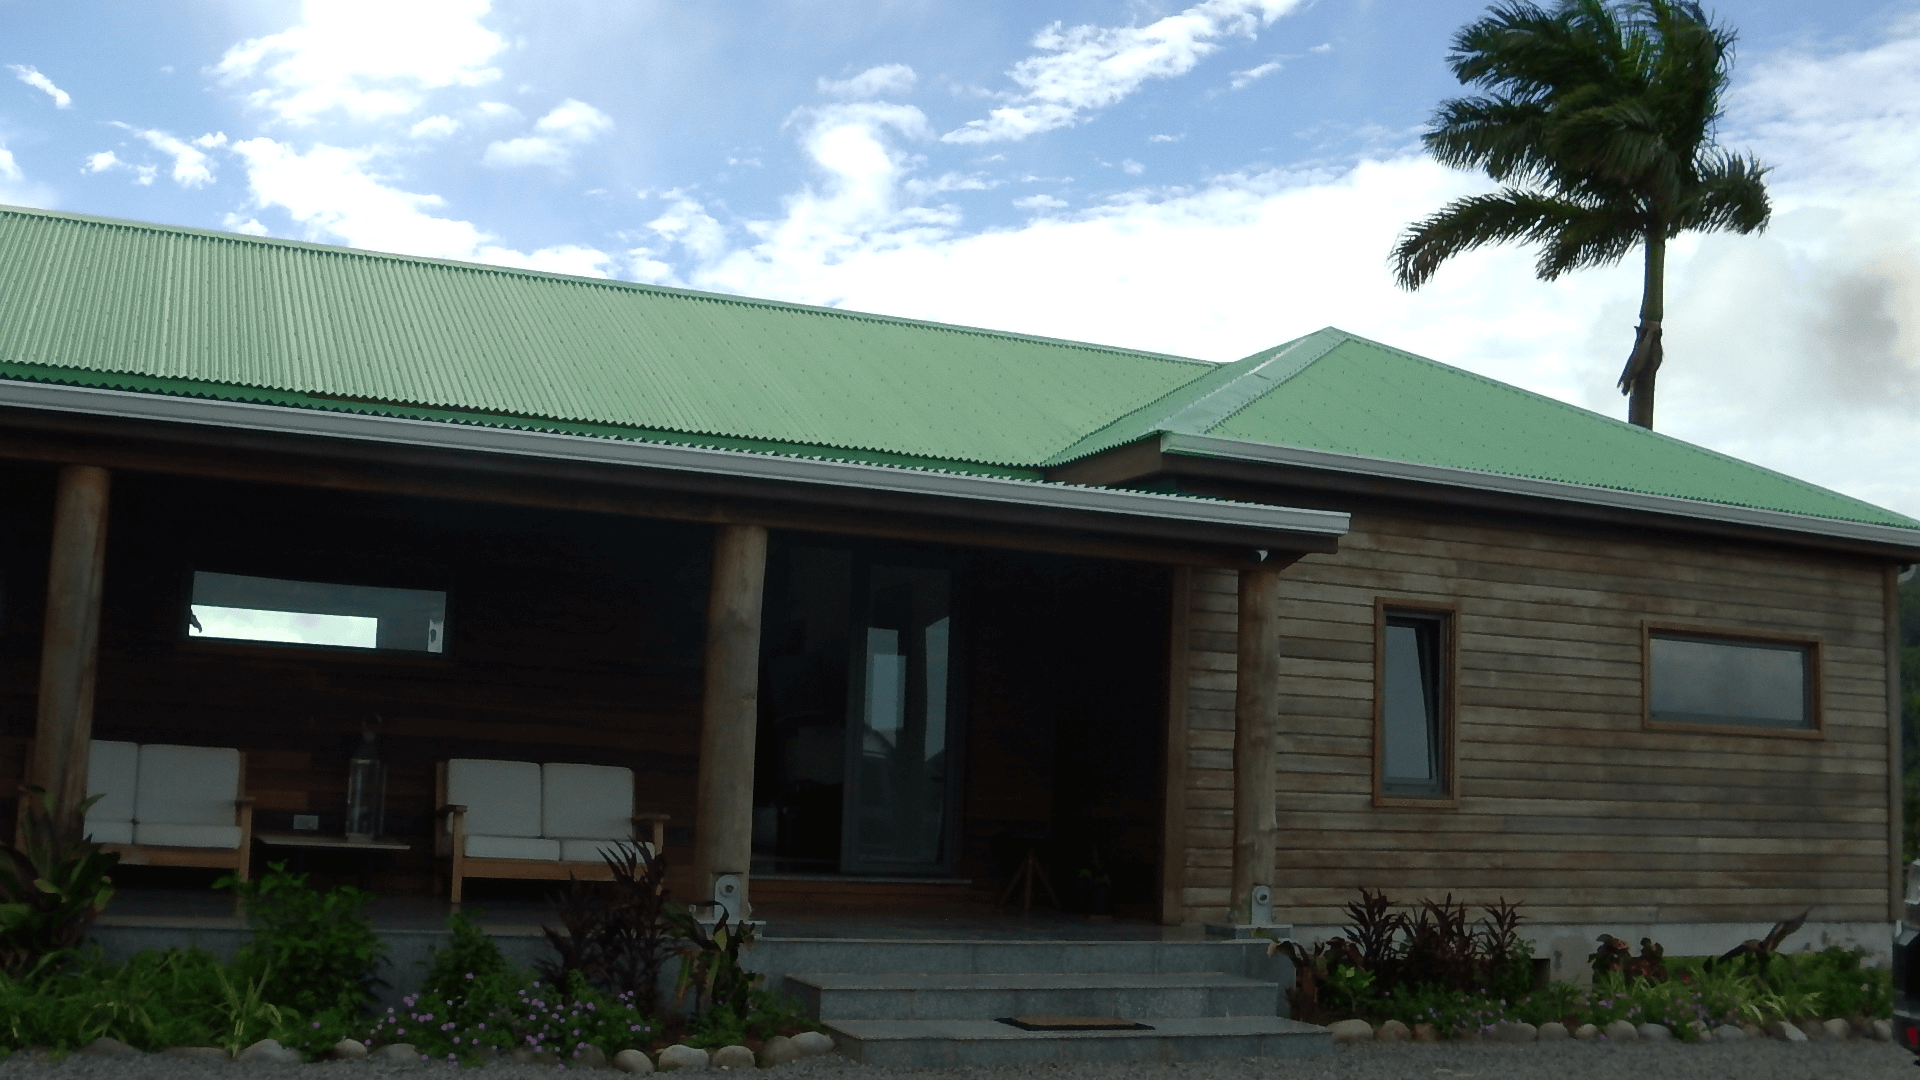 Fully Furnished House for Rent in Borne, Dominica